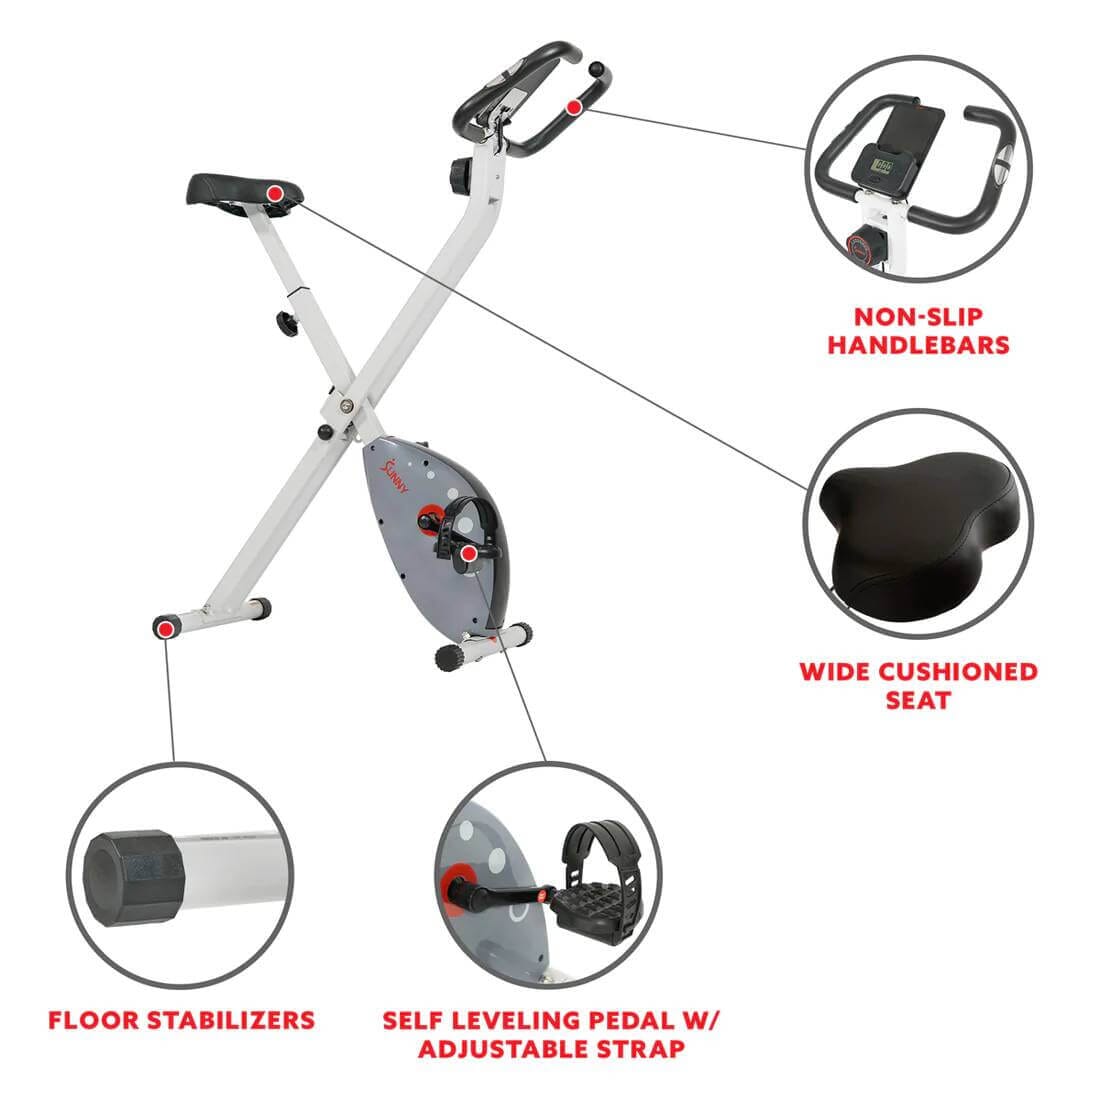 Sunny Health Fitness Compact Exercise Bike - Foldable Magnetic Resistance - Black -33x17x45